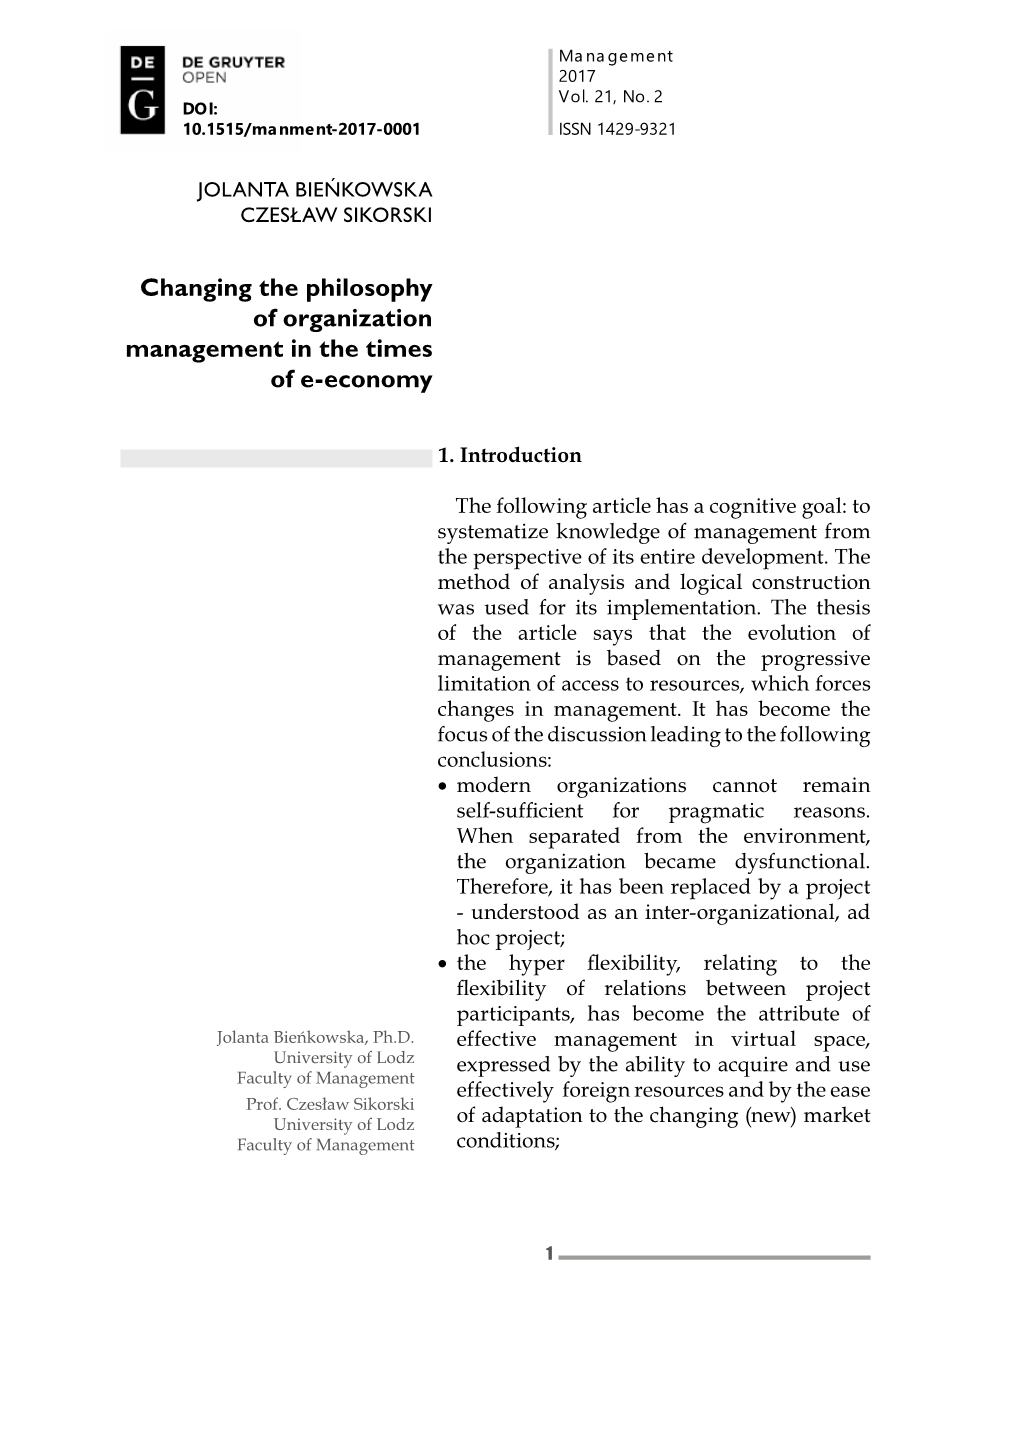 Changing the Philosophy of Organization Management in the Times of E-Economy